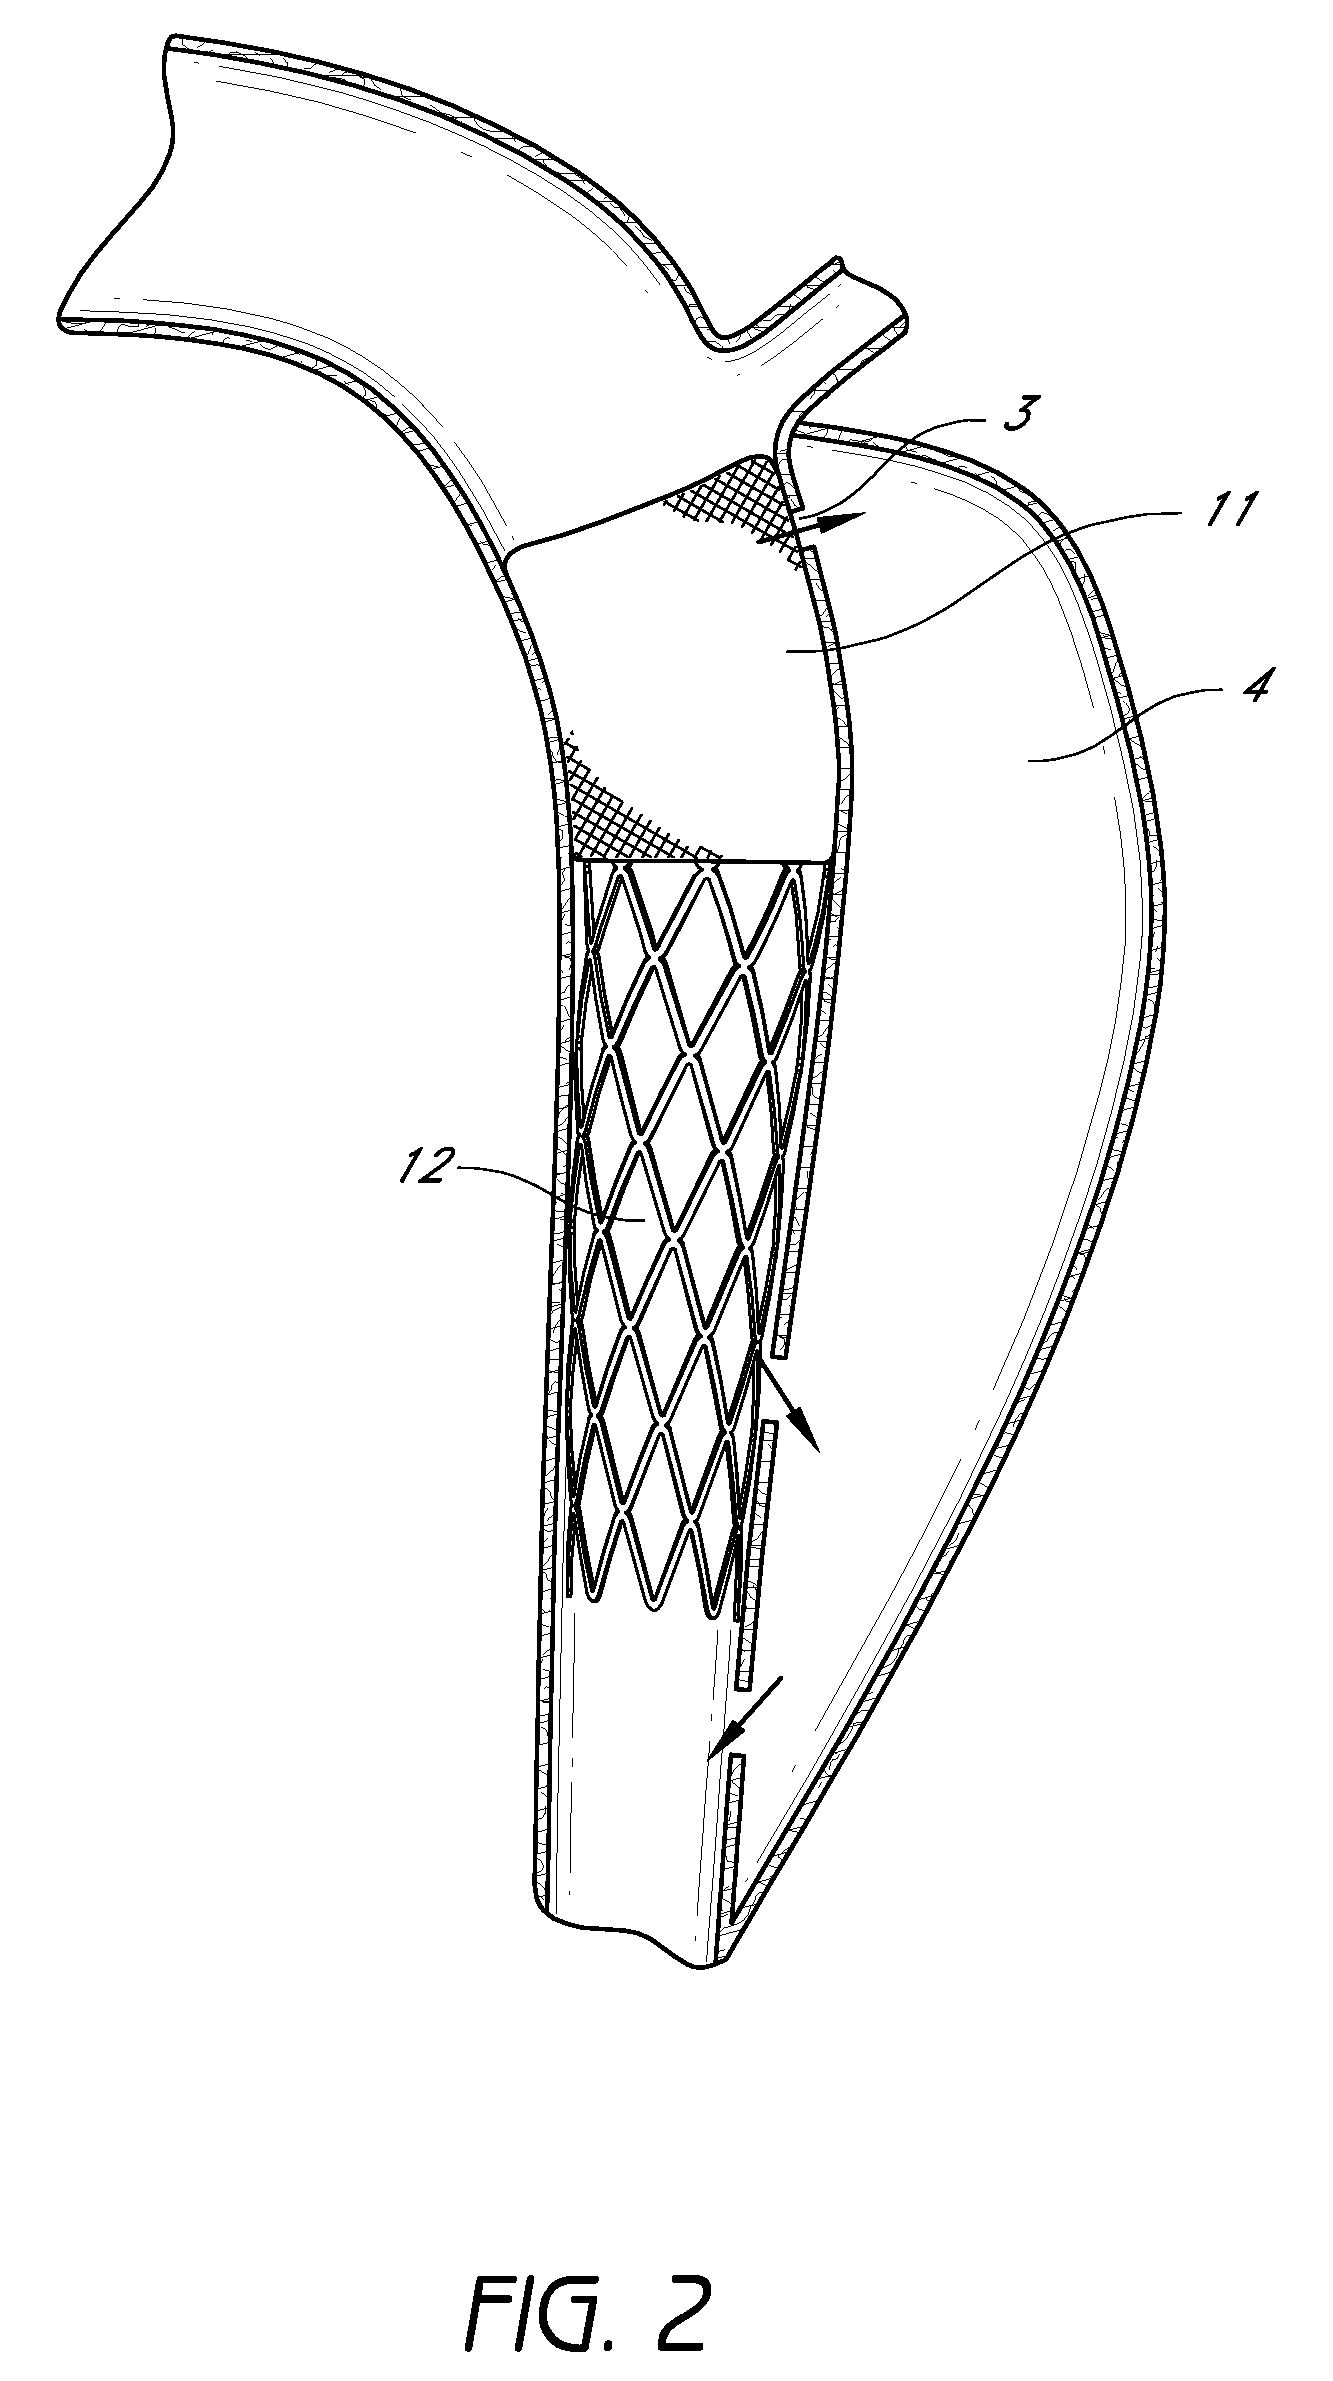 Devices and methods to treat vascular dissections